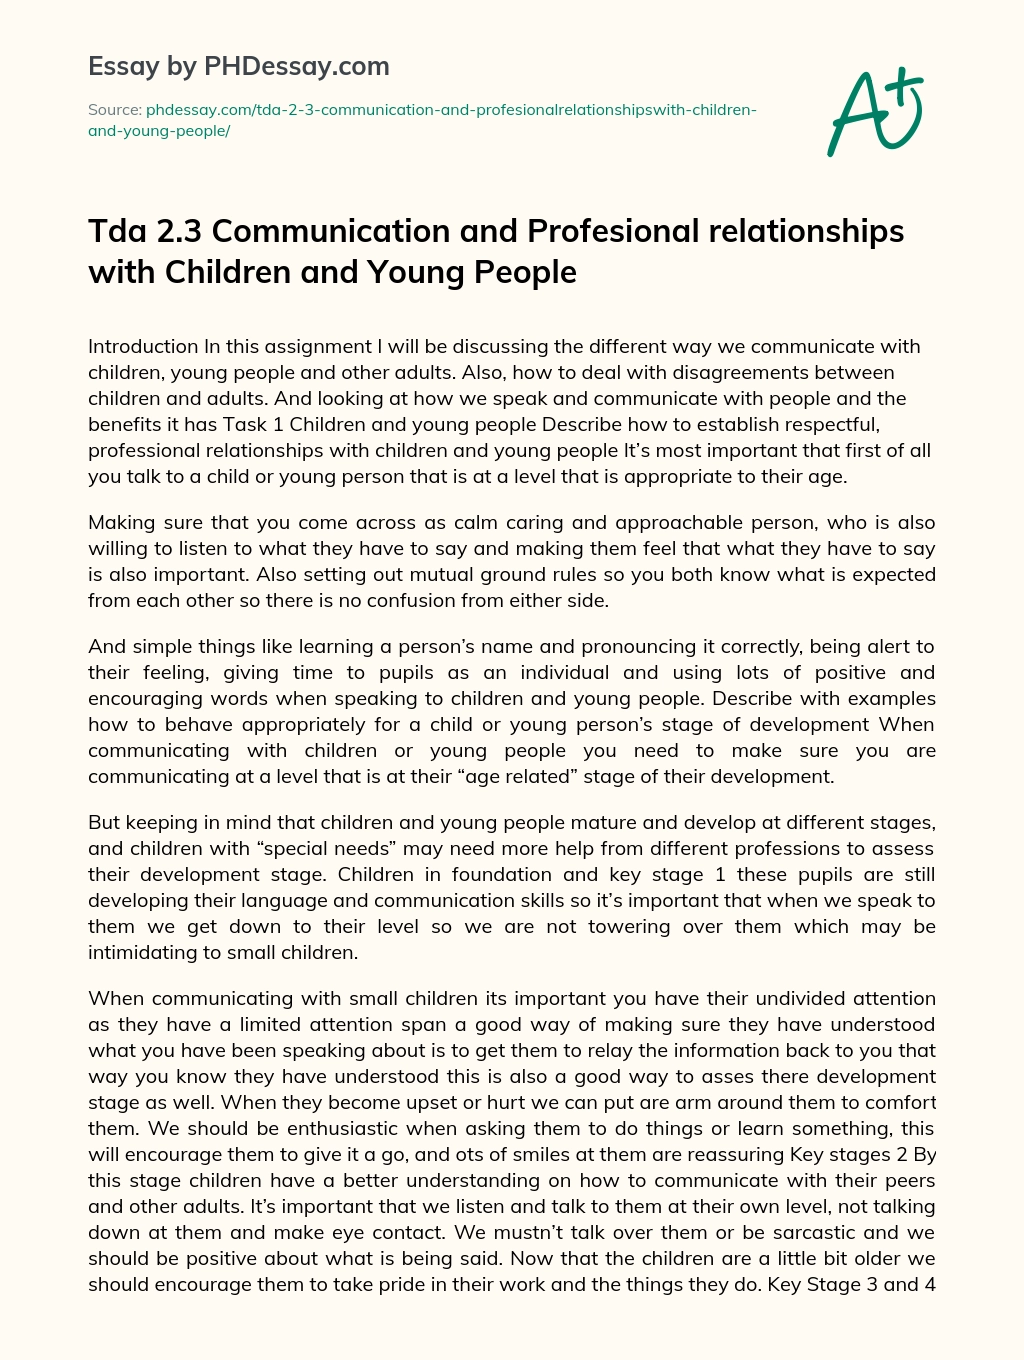 Tda 2.3 Communication and Profesional relationships with Children and Young People essay